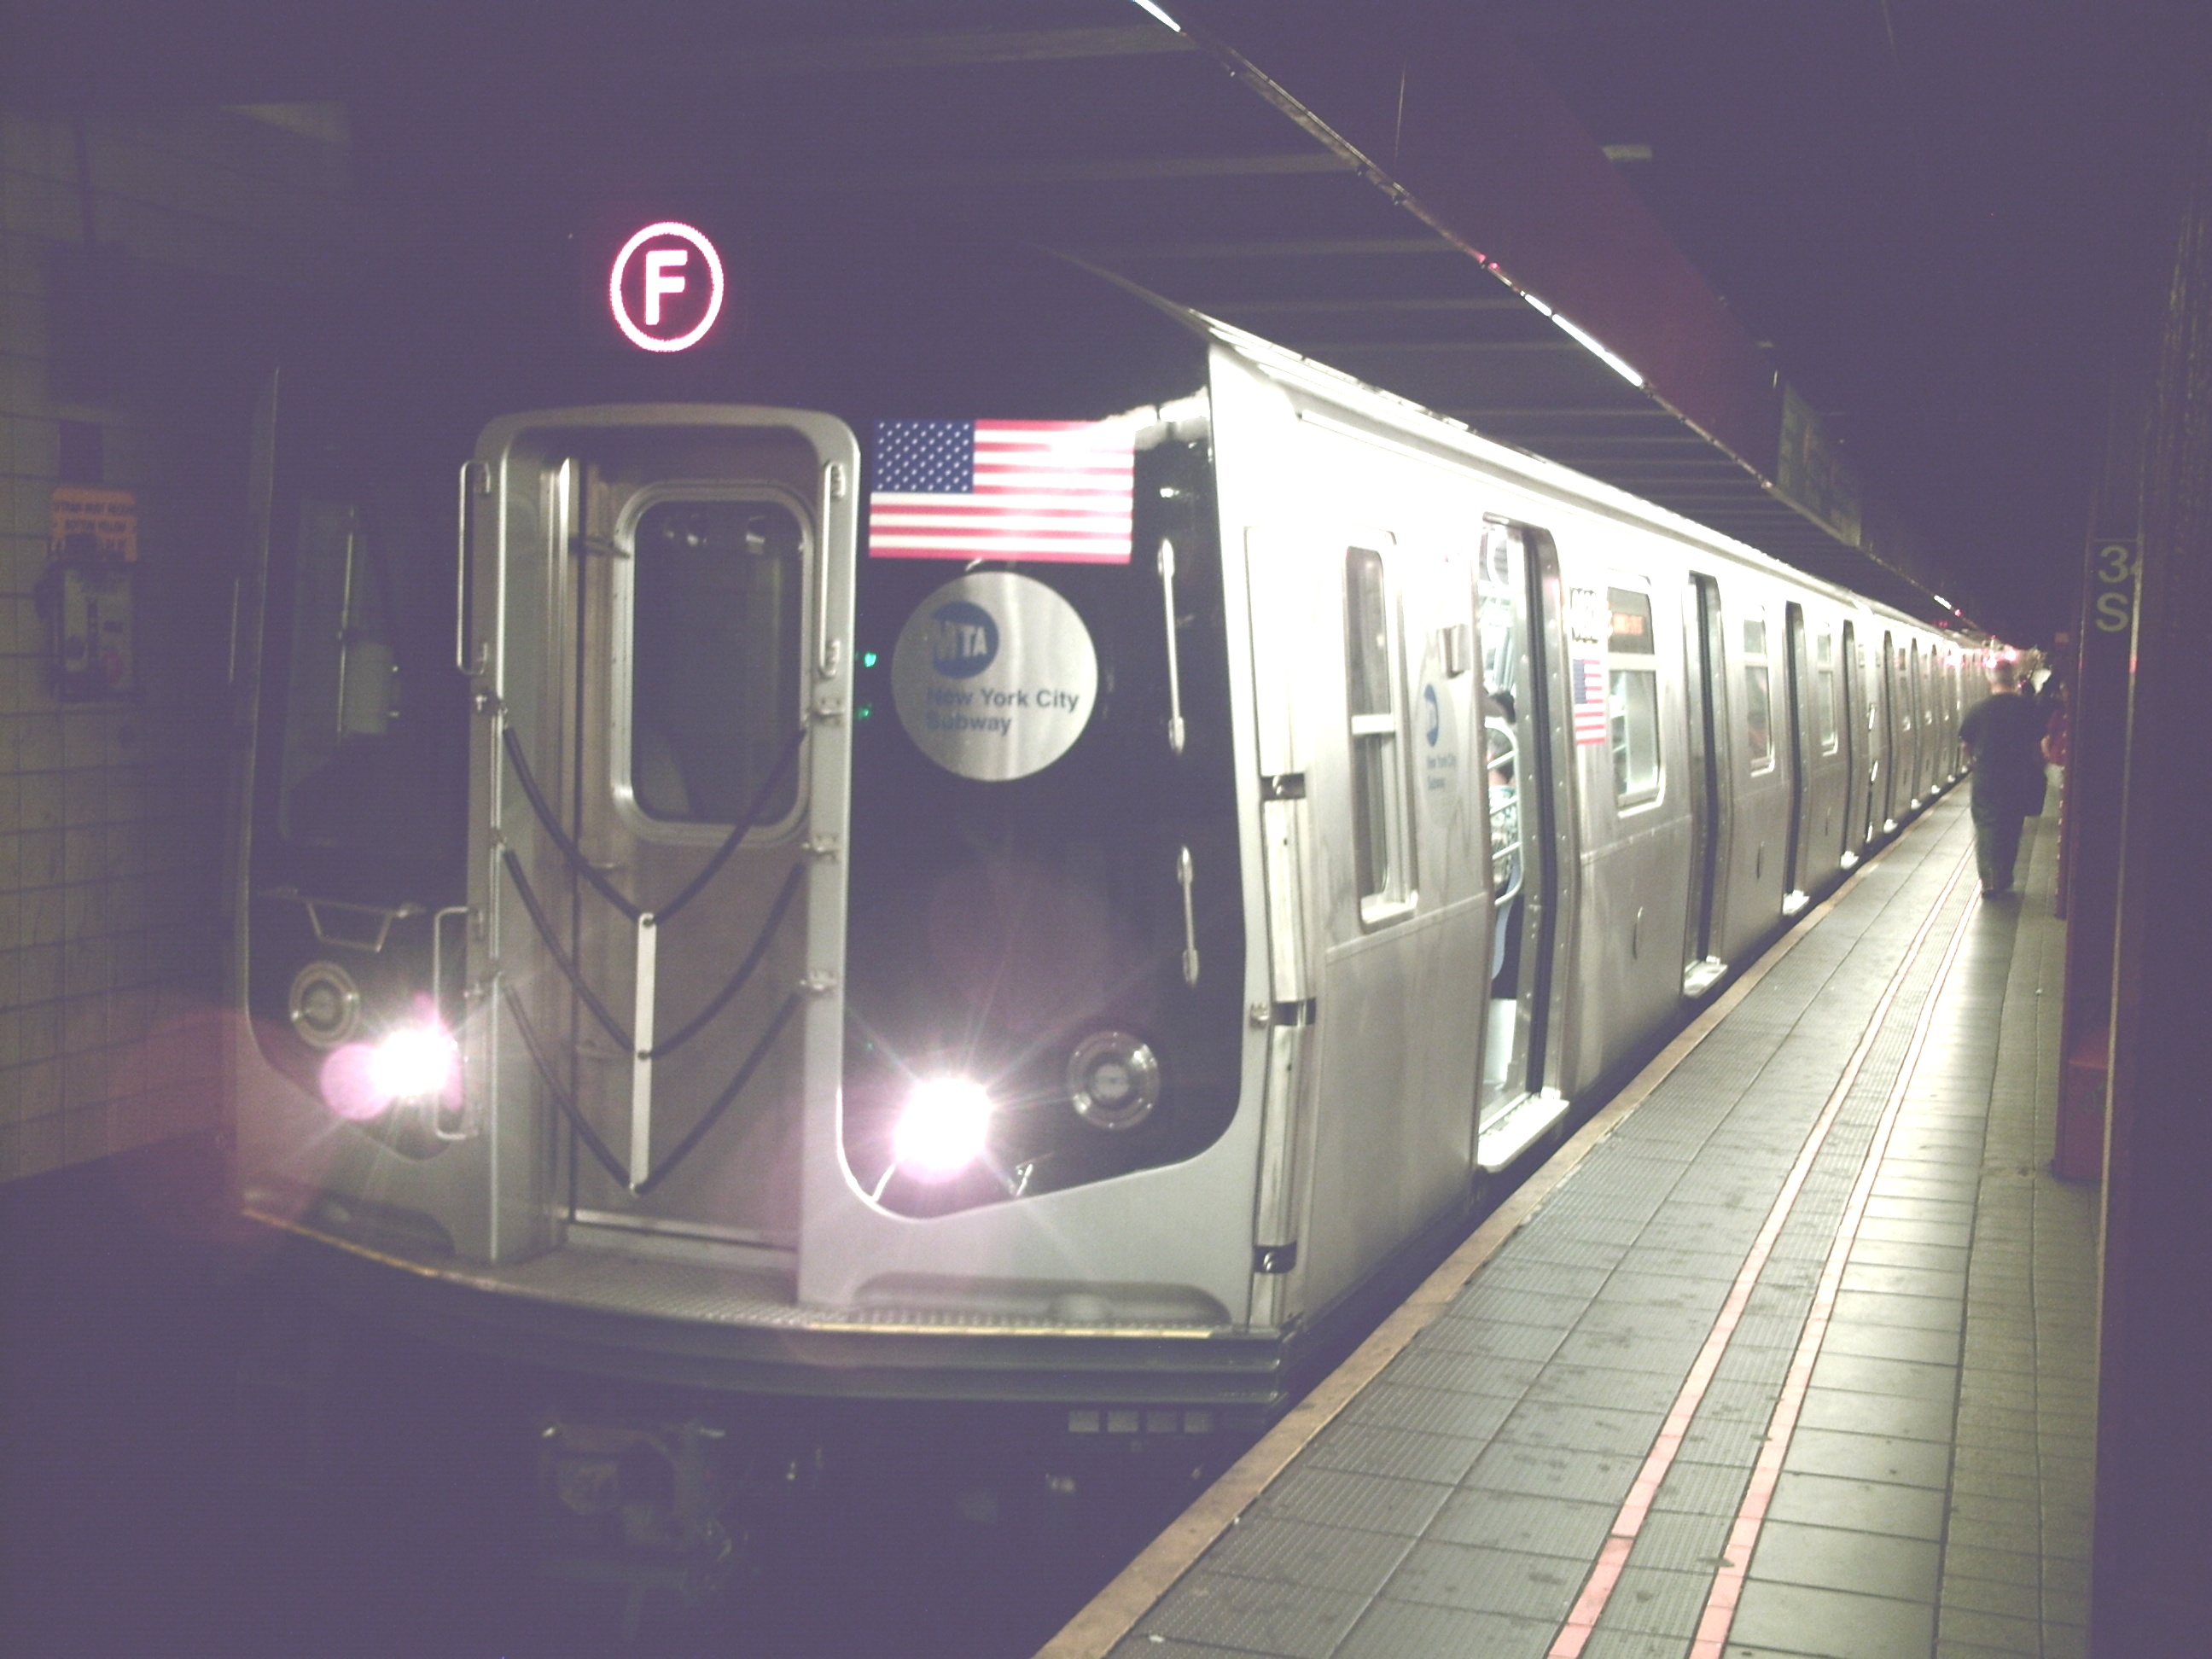 Express F Train Service To Kick-off In Brooklyn In 2017, Leaving Local Riders To Wait Longer For Service